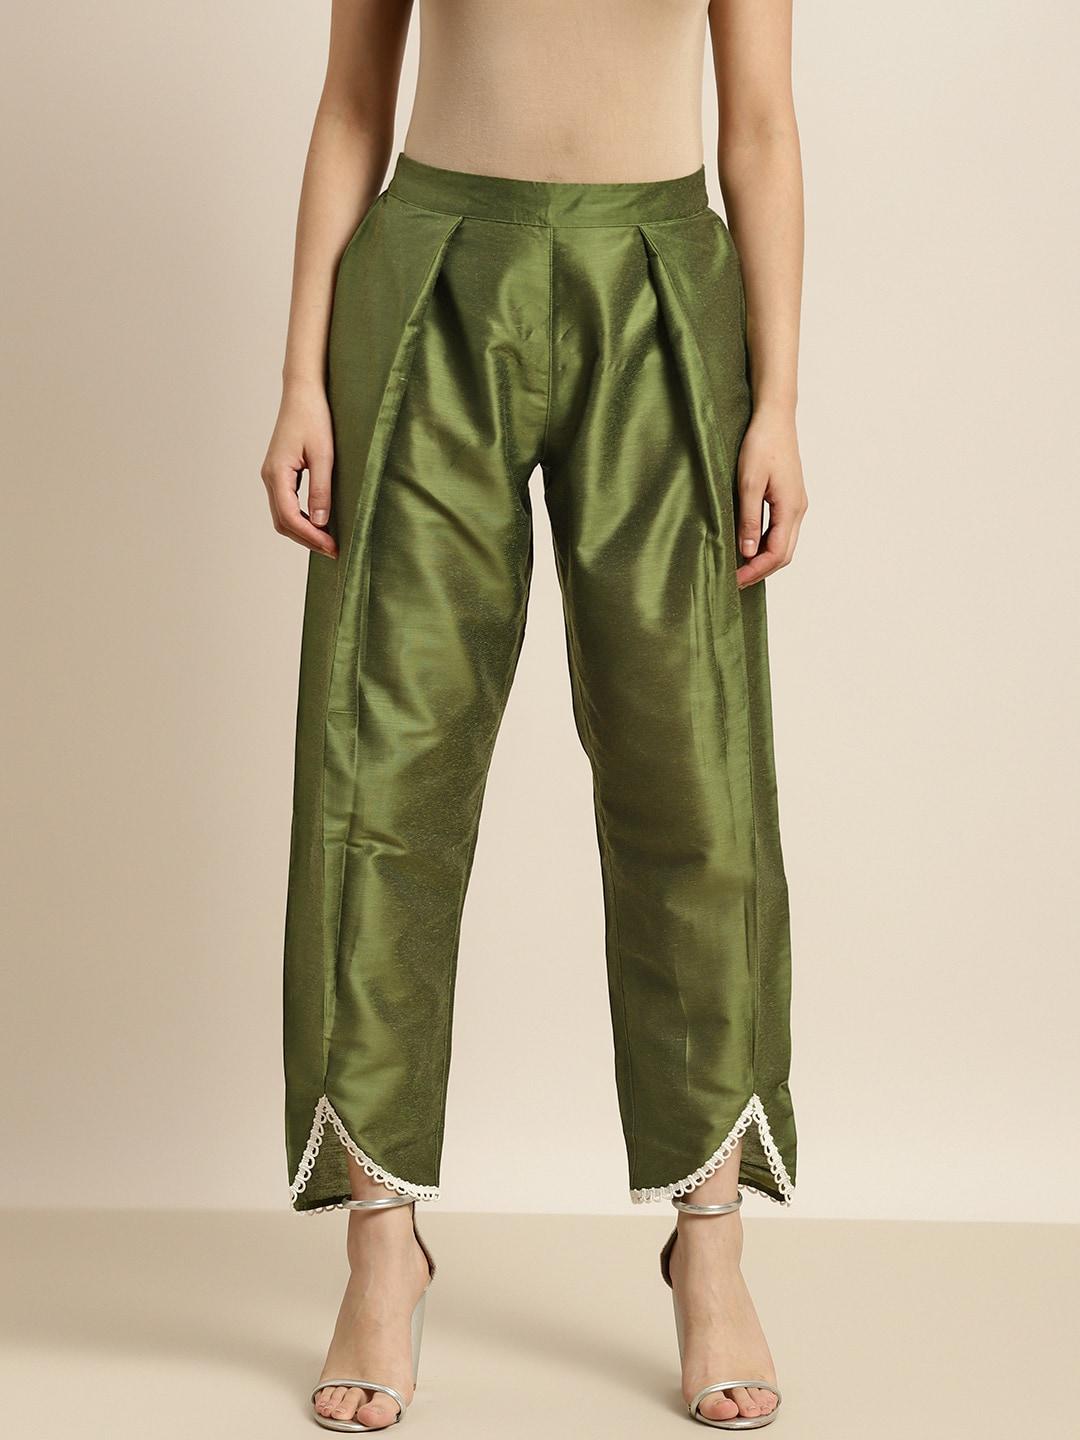 shae by sassafras women olive green comfort trousers